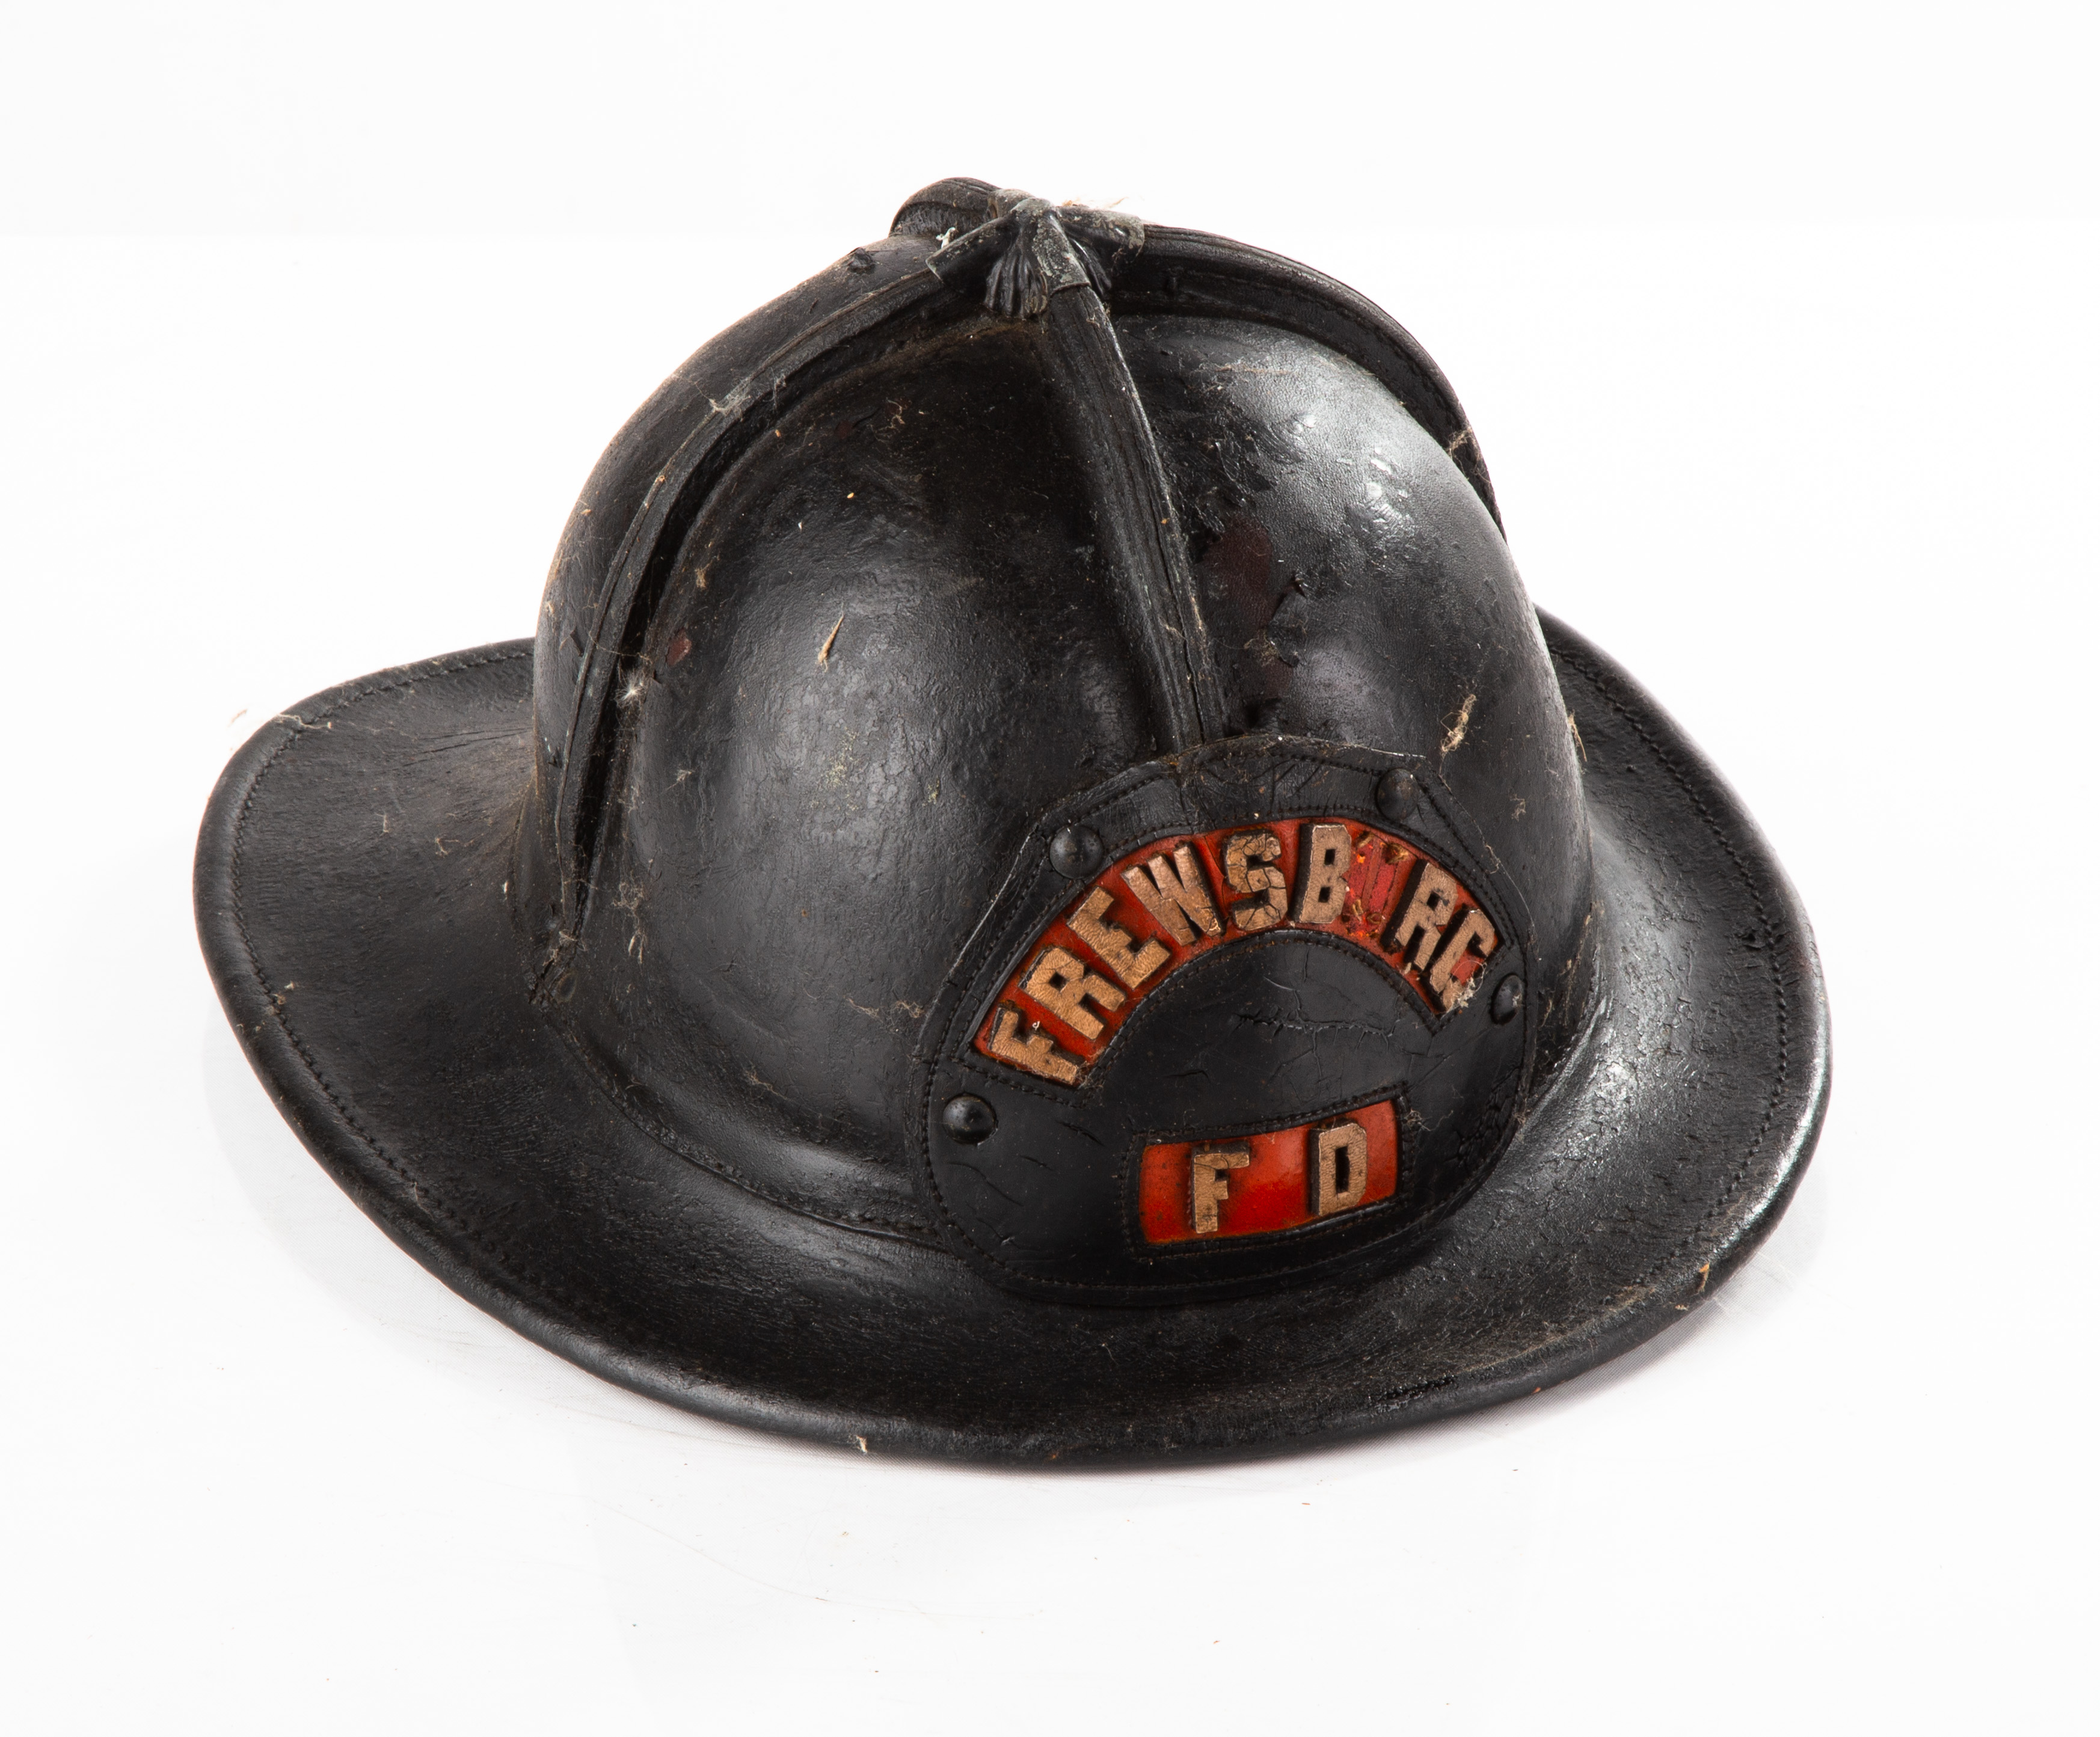 FREWSBURG FIRE DEPARTMENT LEATHER